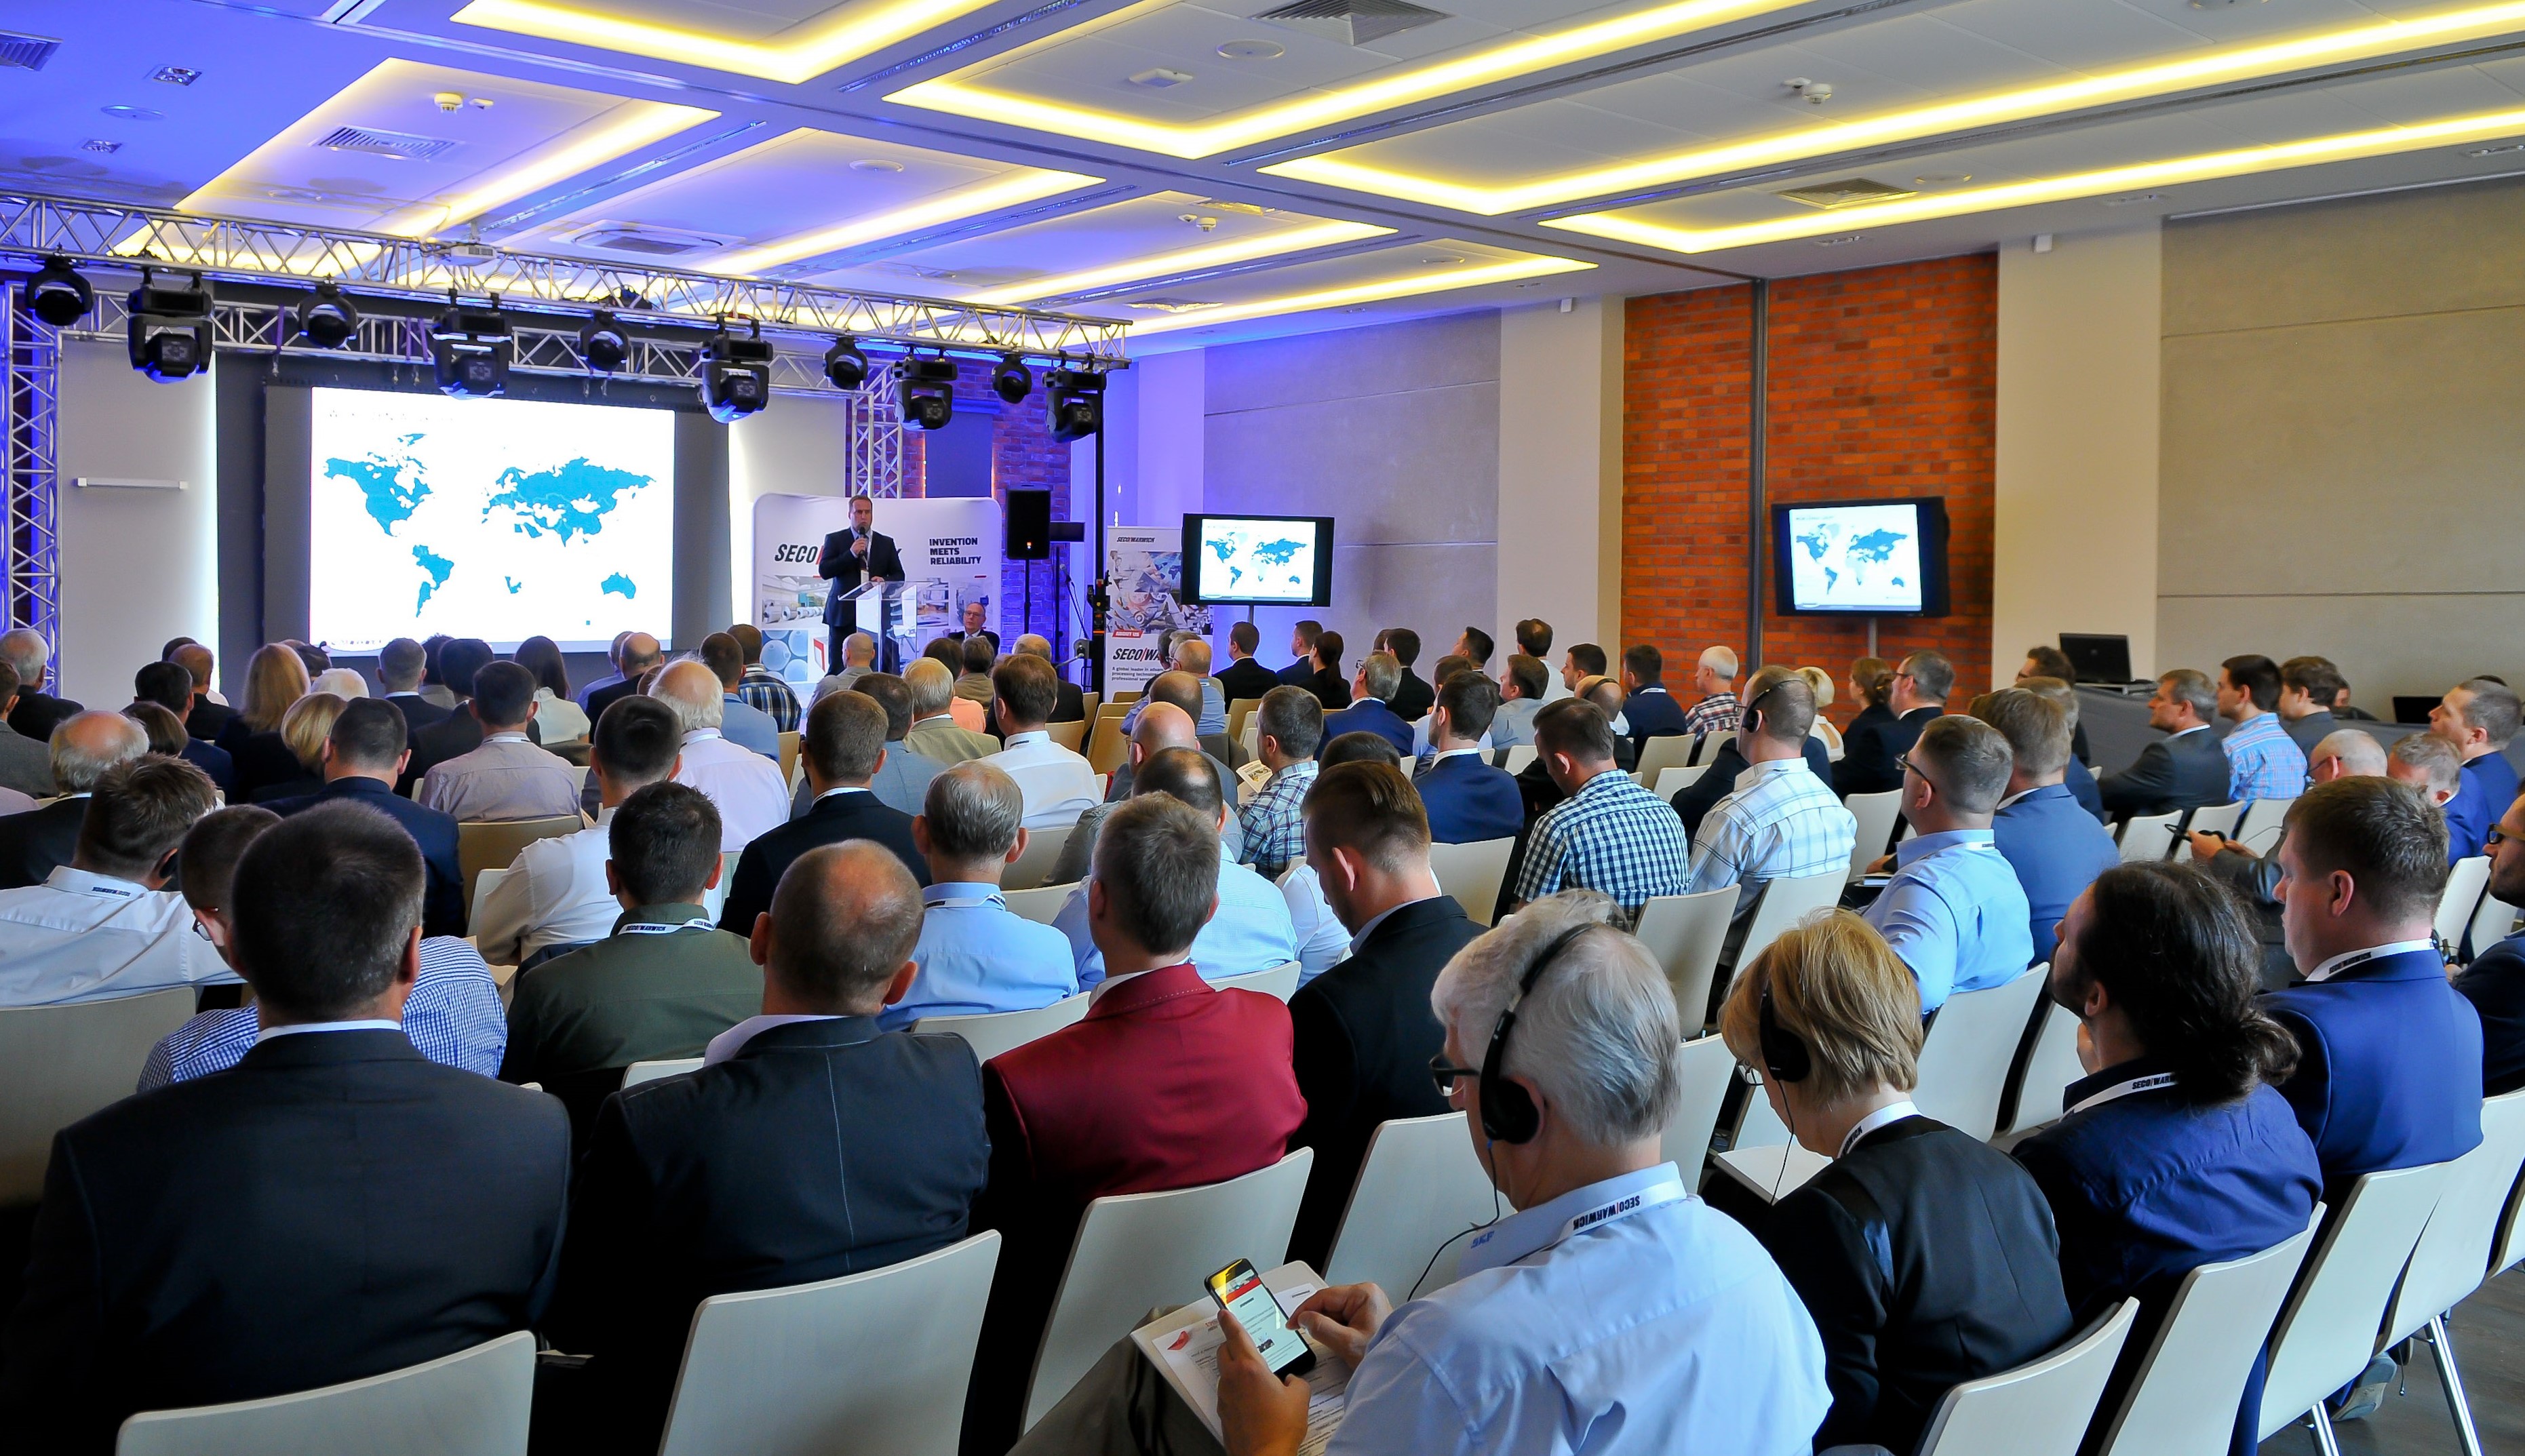 SECO/WARWICK Europe’s 19th Seminar, „New Trends in Heat Treatment”, Attracts Global Audience